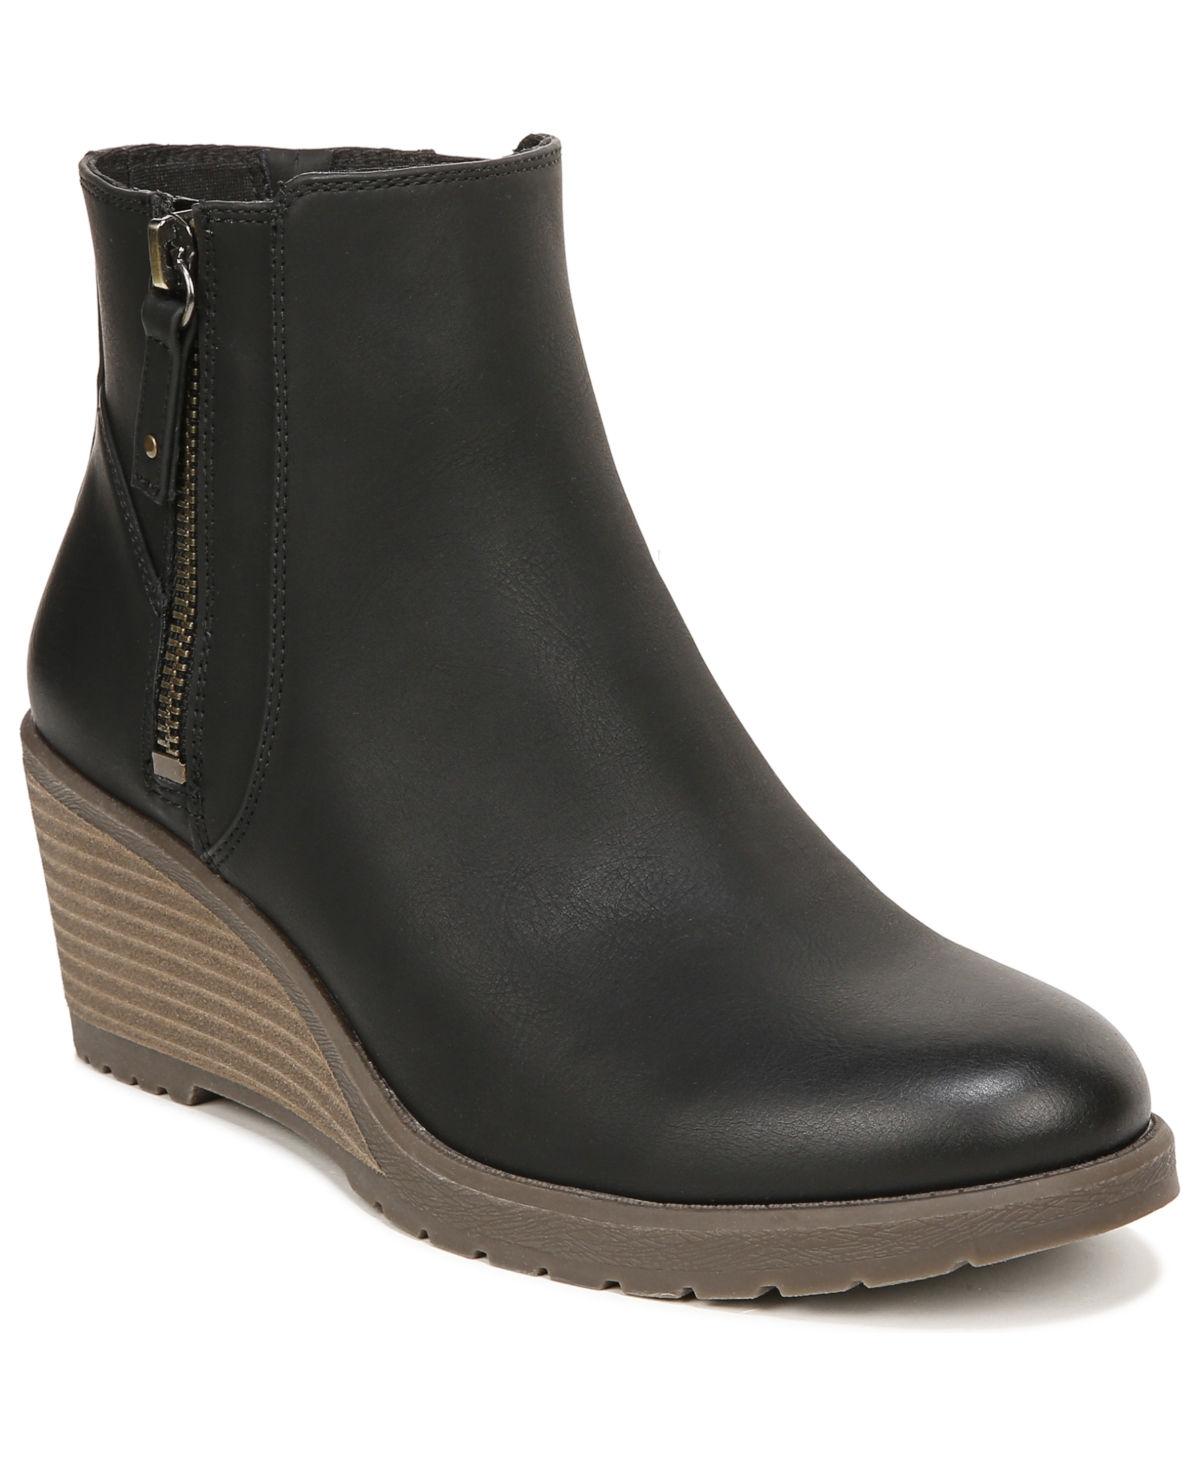 Dr. Scholl's Women's Chloe Wedge Booties In Black Faux Leather